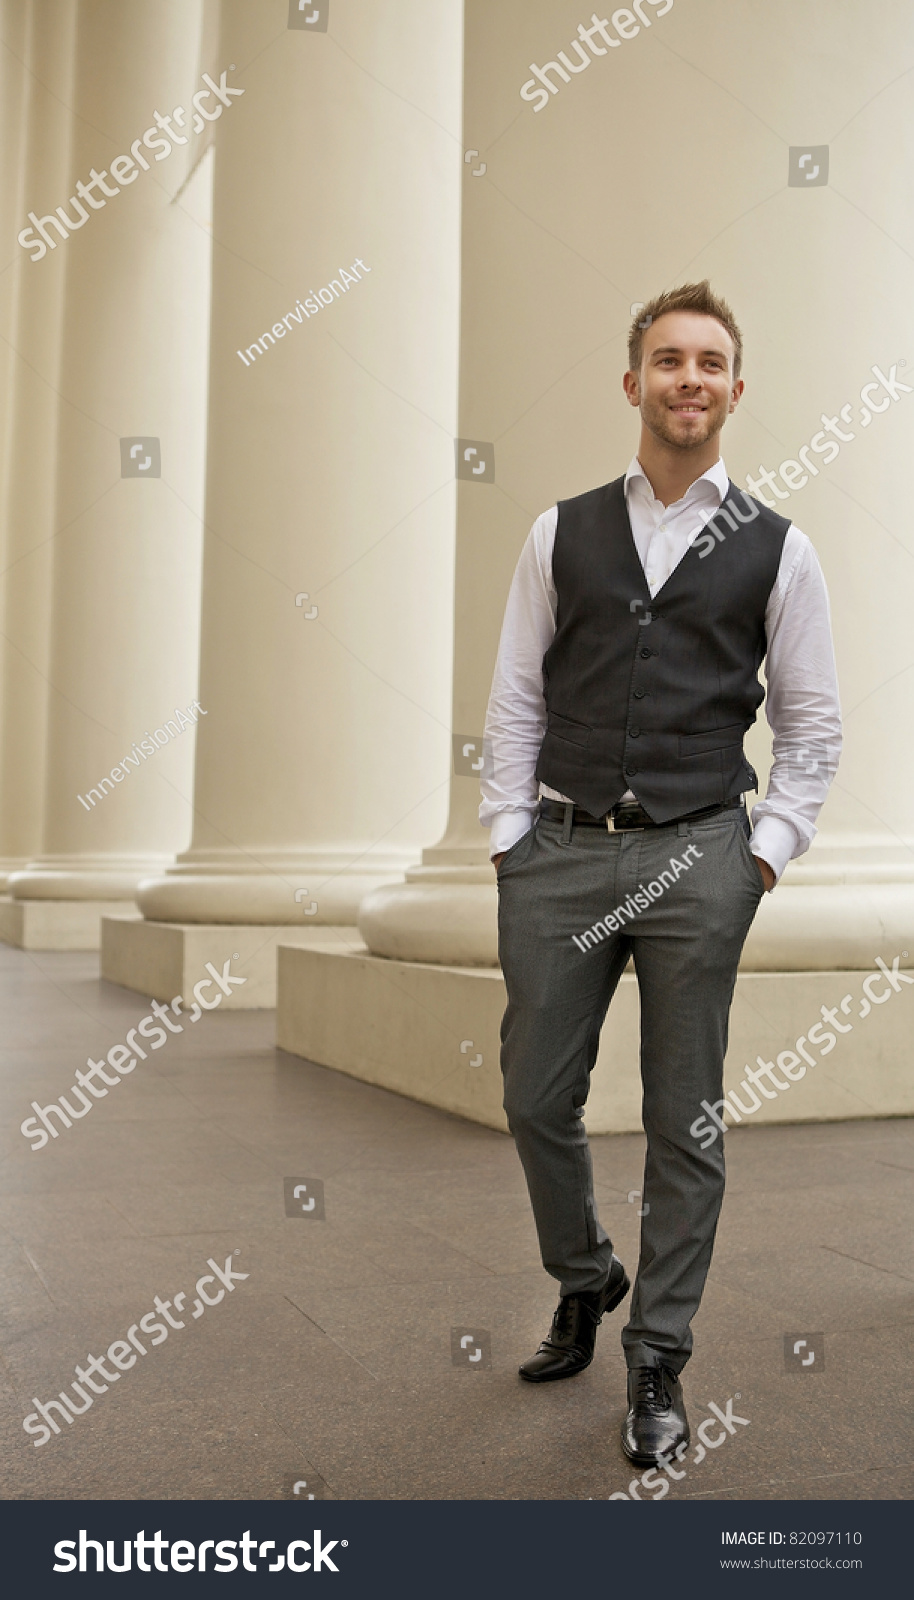 Portrait of a cheerful young businessman #82097110